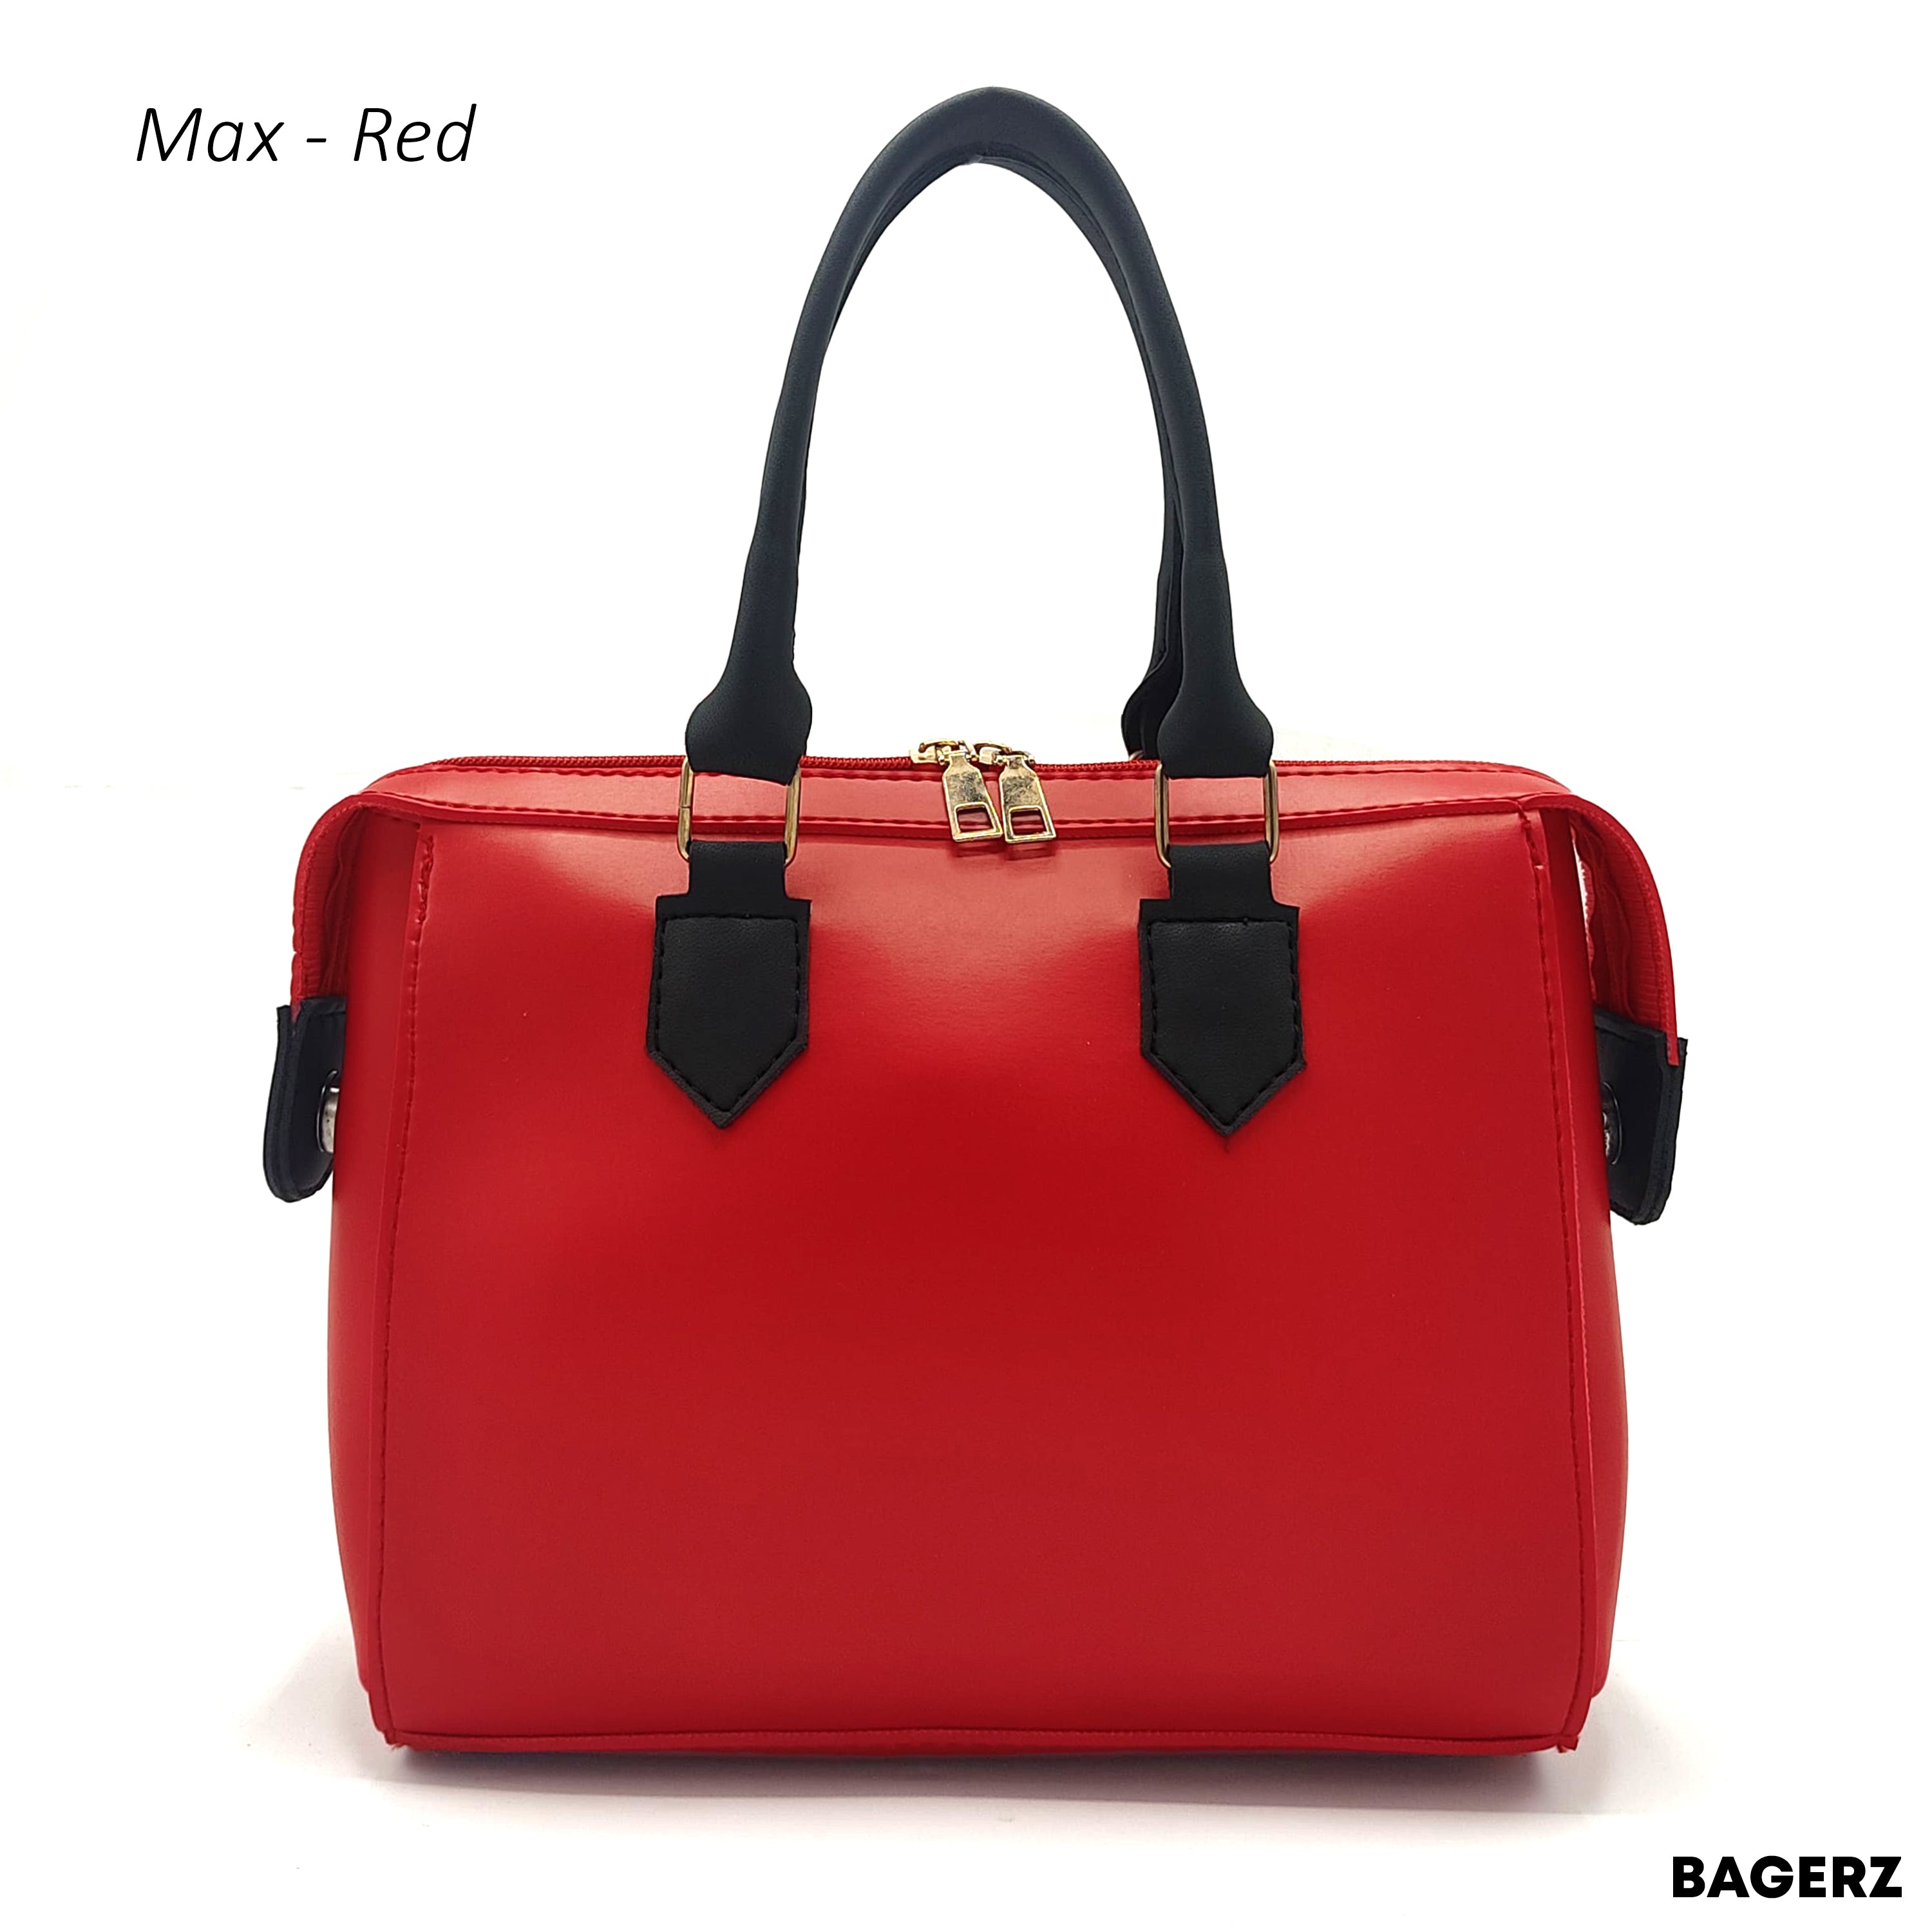 Max - Red